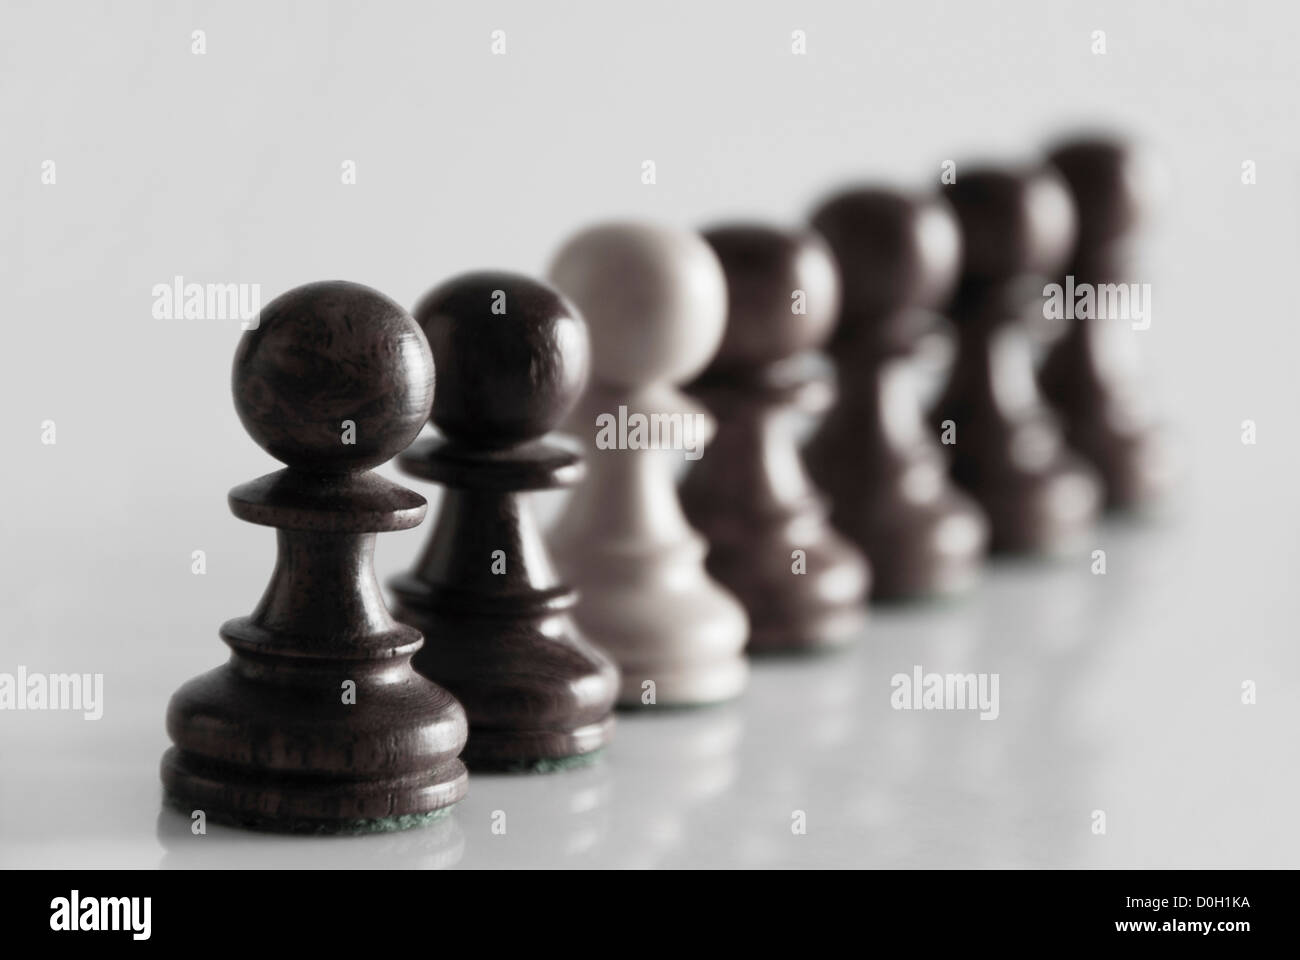 Chess pawns in a row Stock Photo